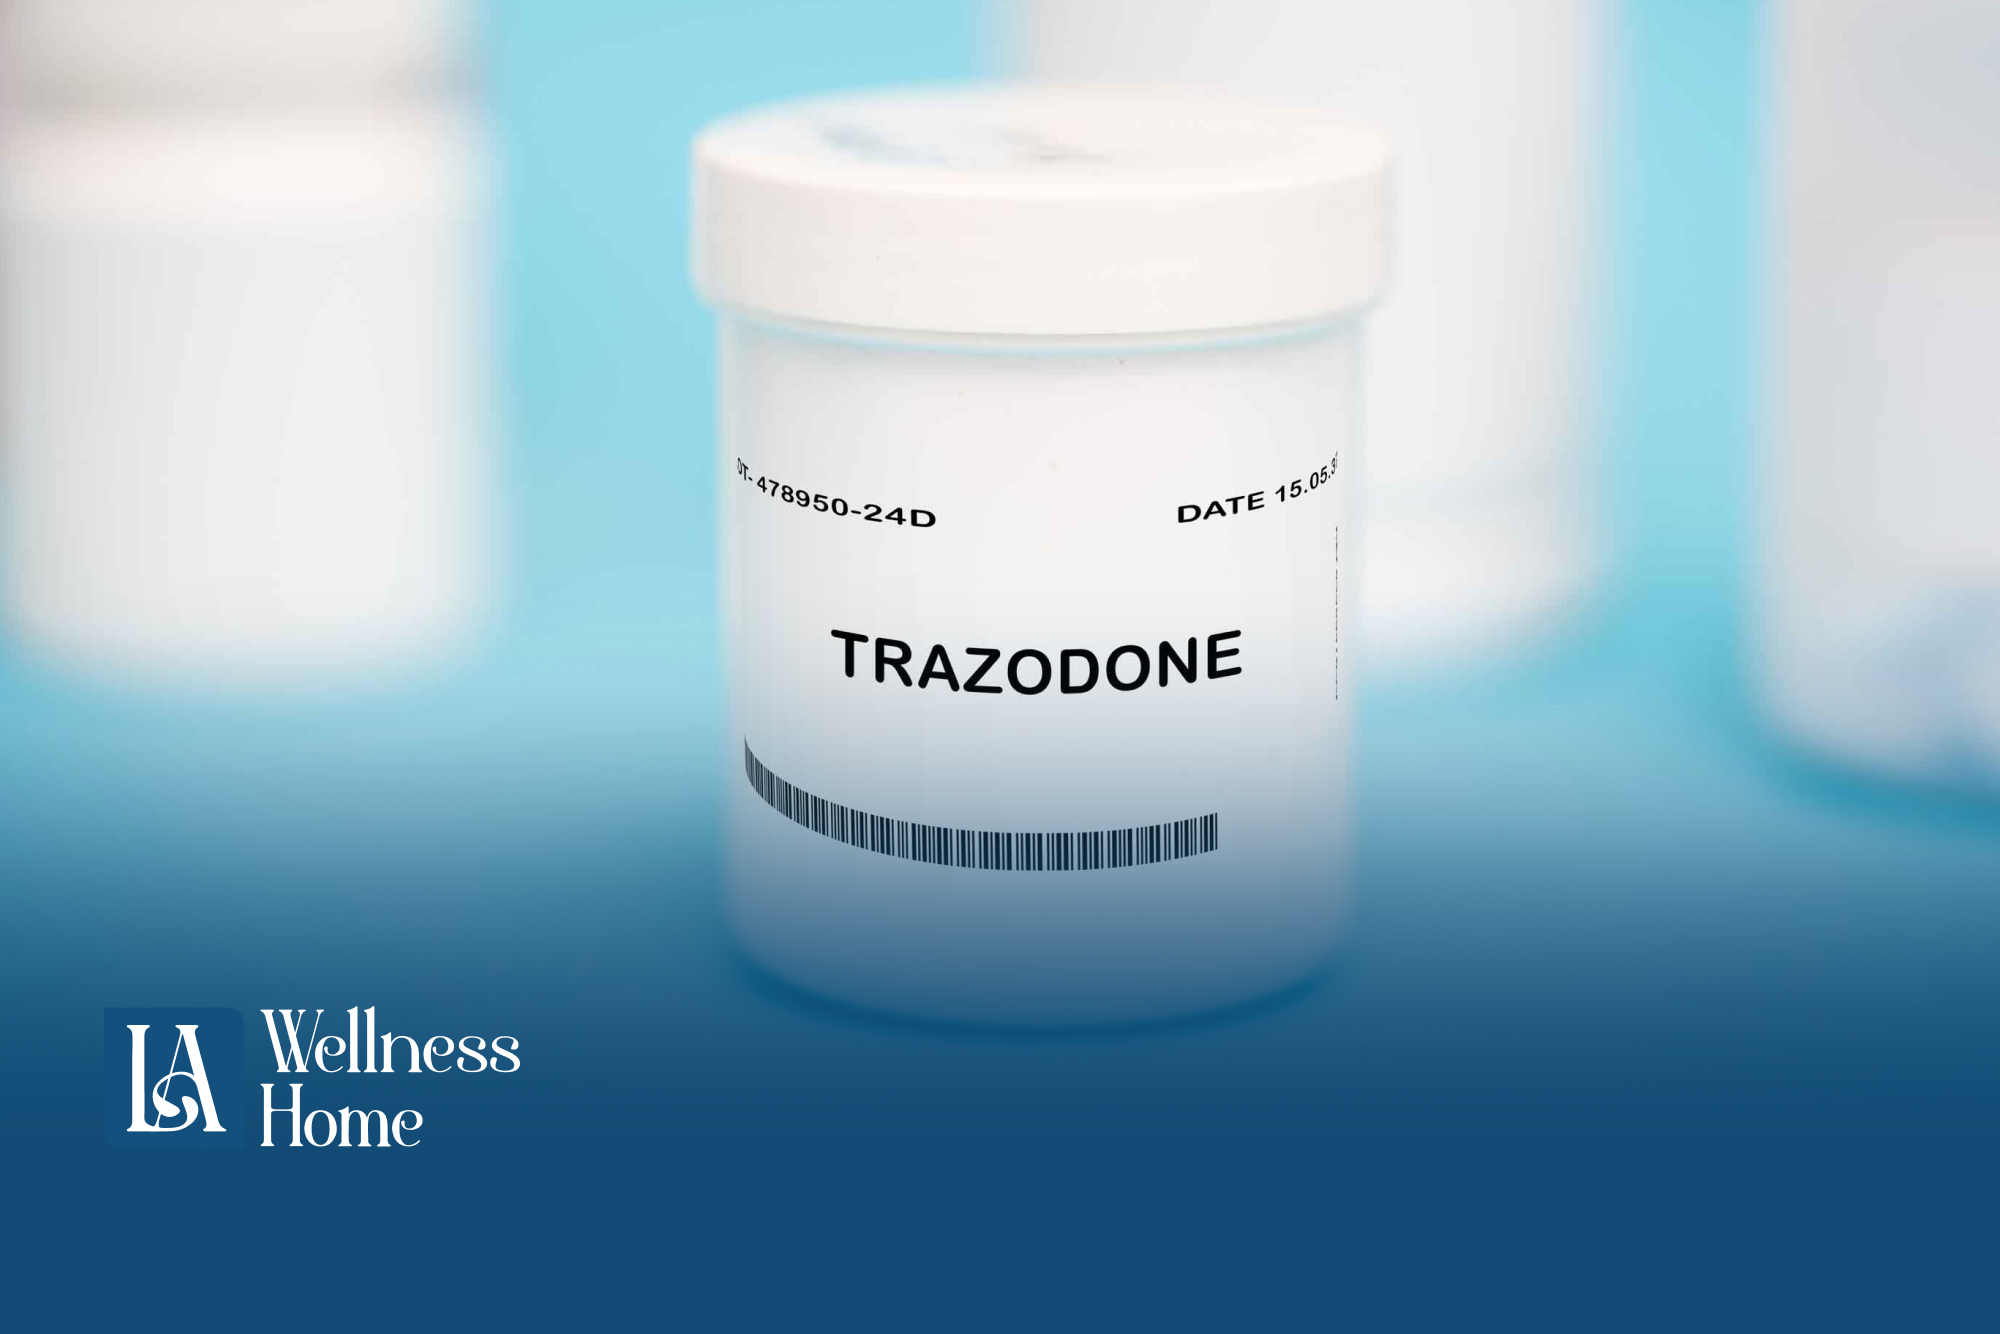 Can you Overdose on Trazodone?